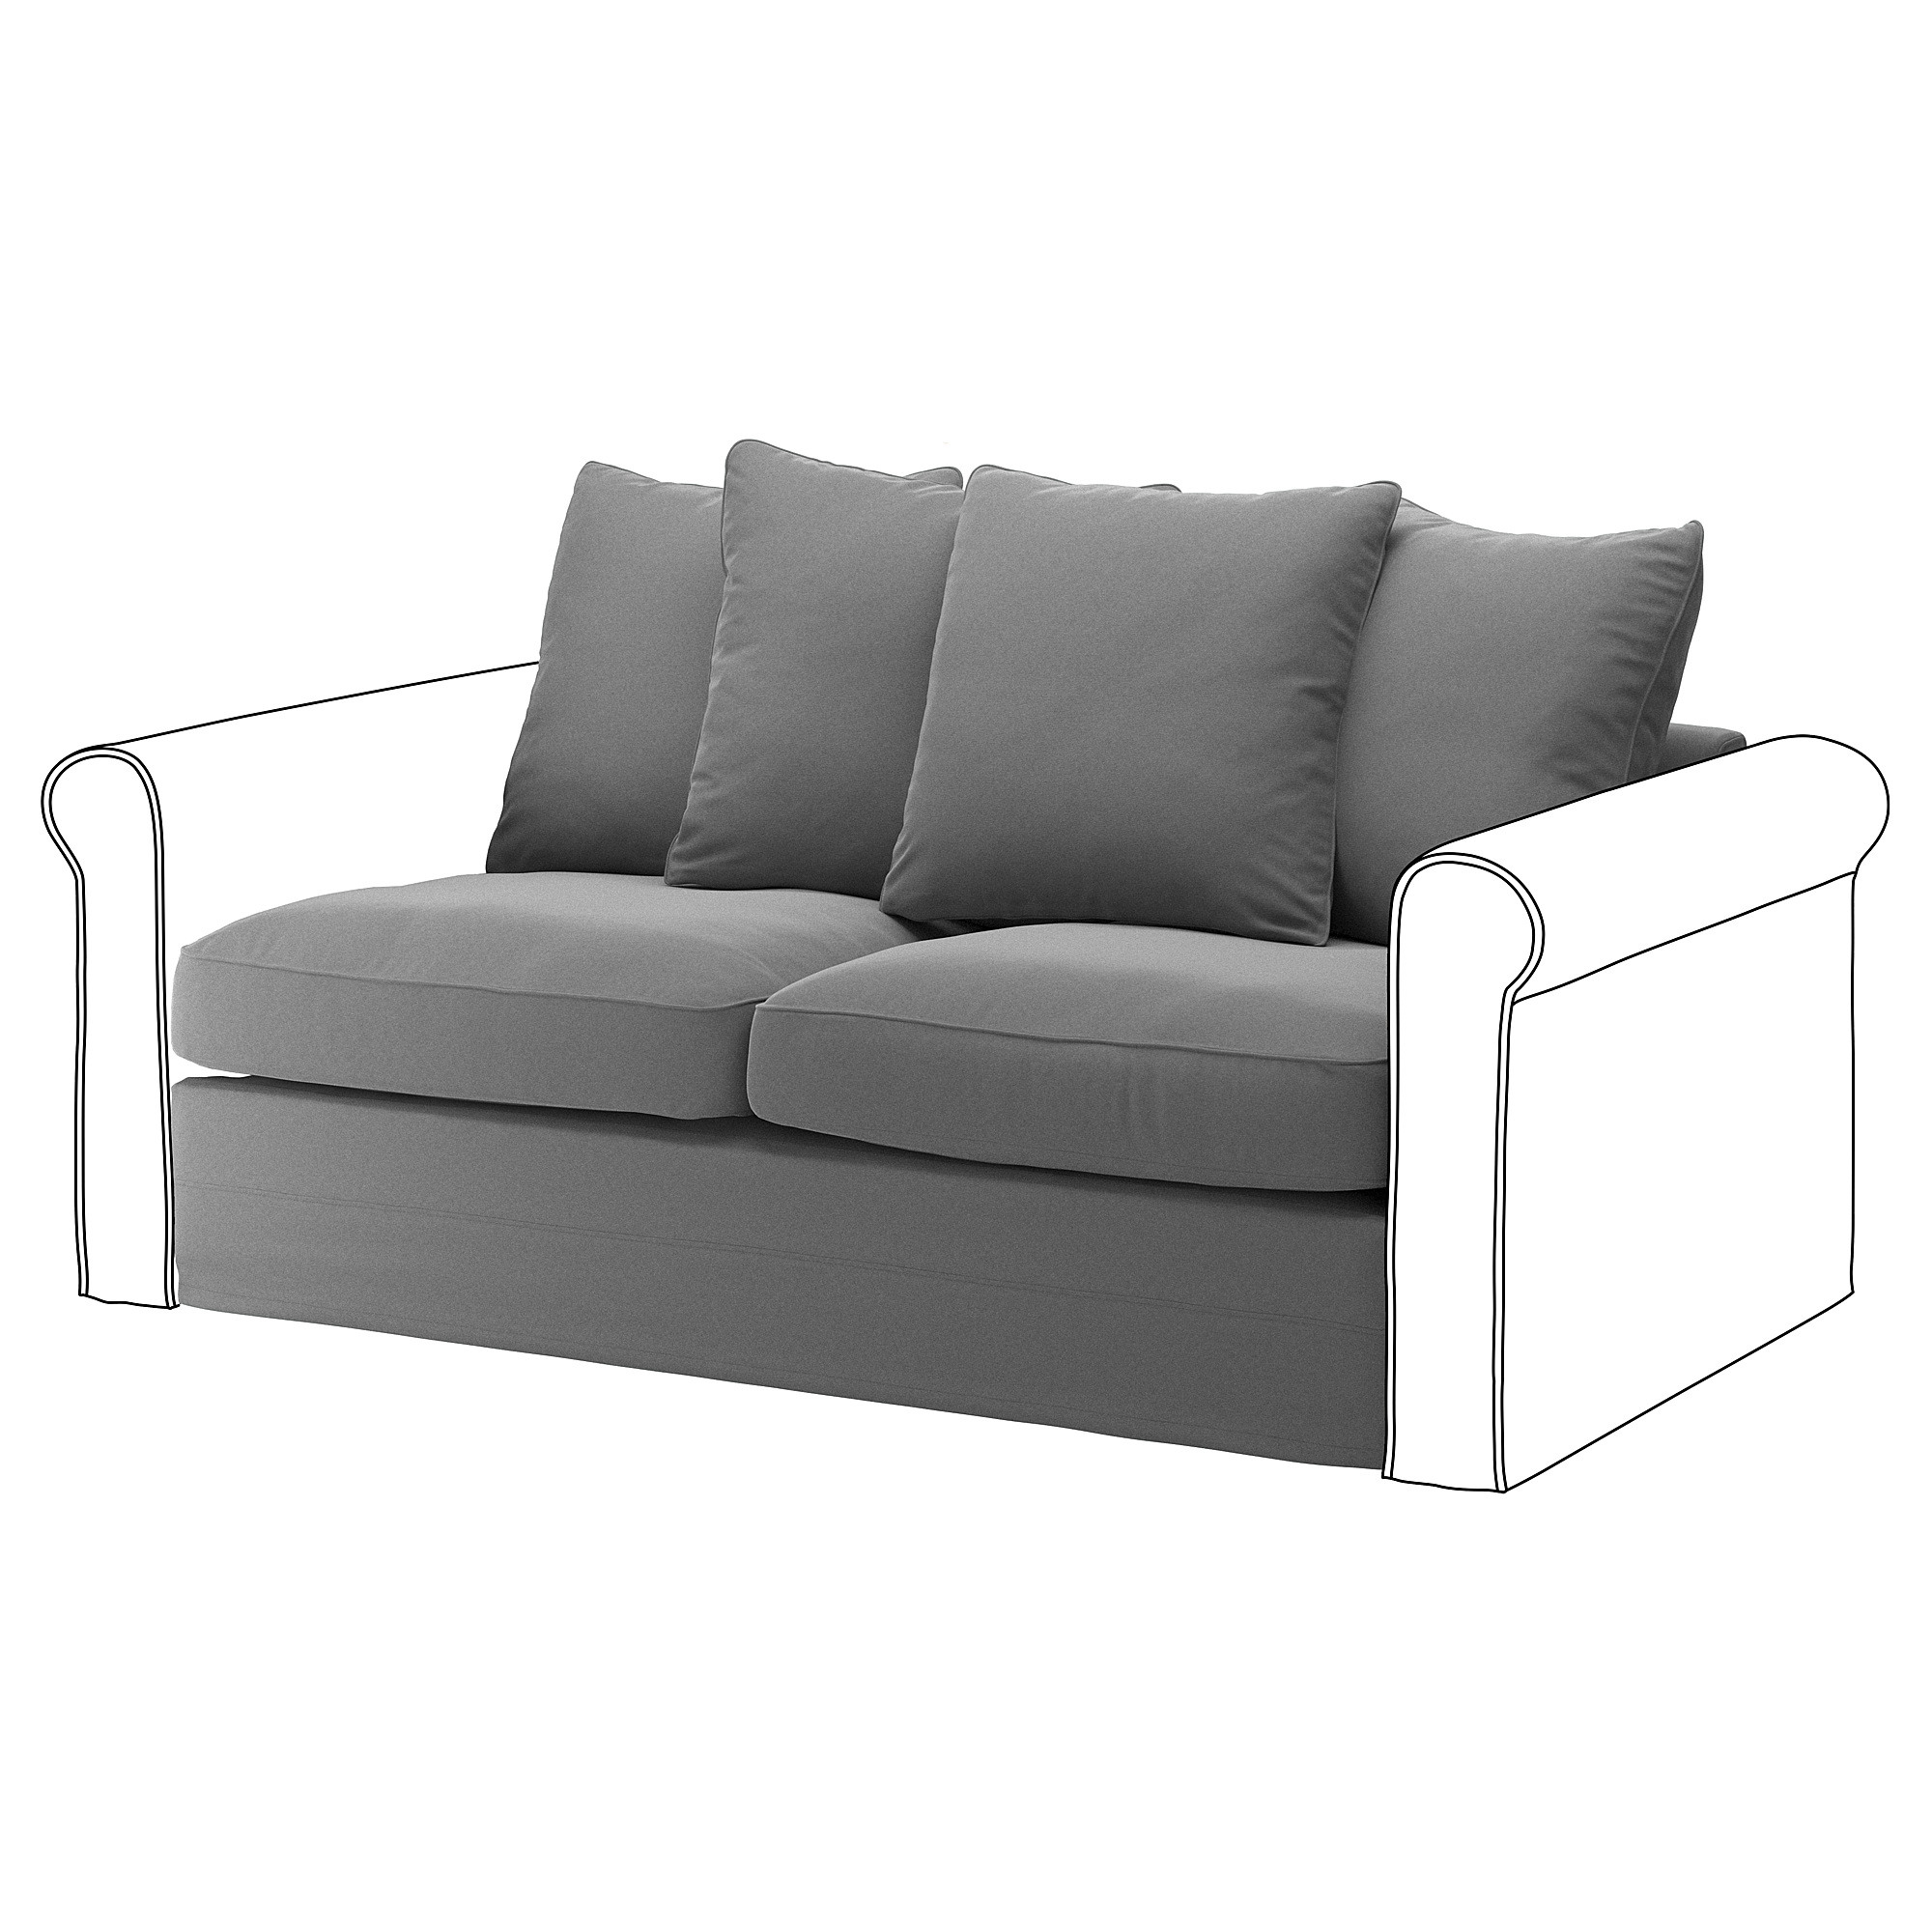 GRÖNLID cover for 2-seat sofa-bed section